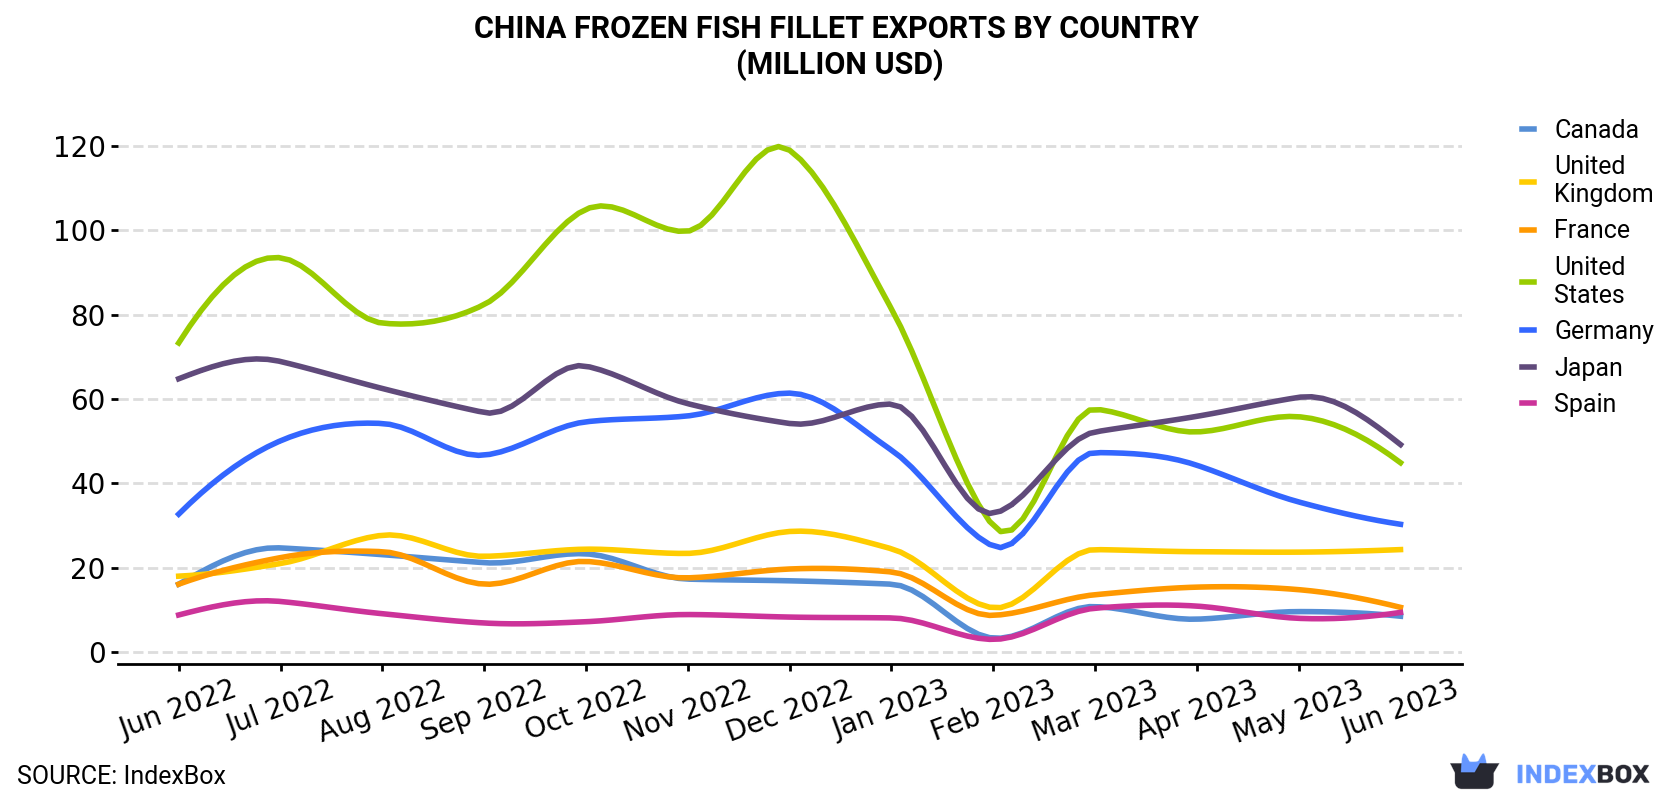 China Frozen Fish Fillet Exports By Country (Million USD)